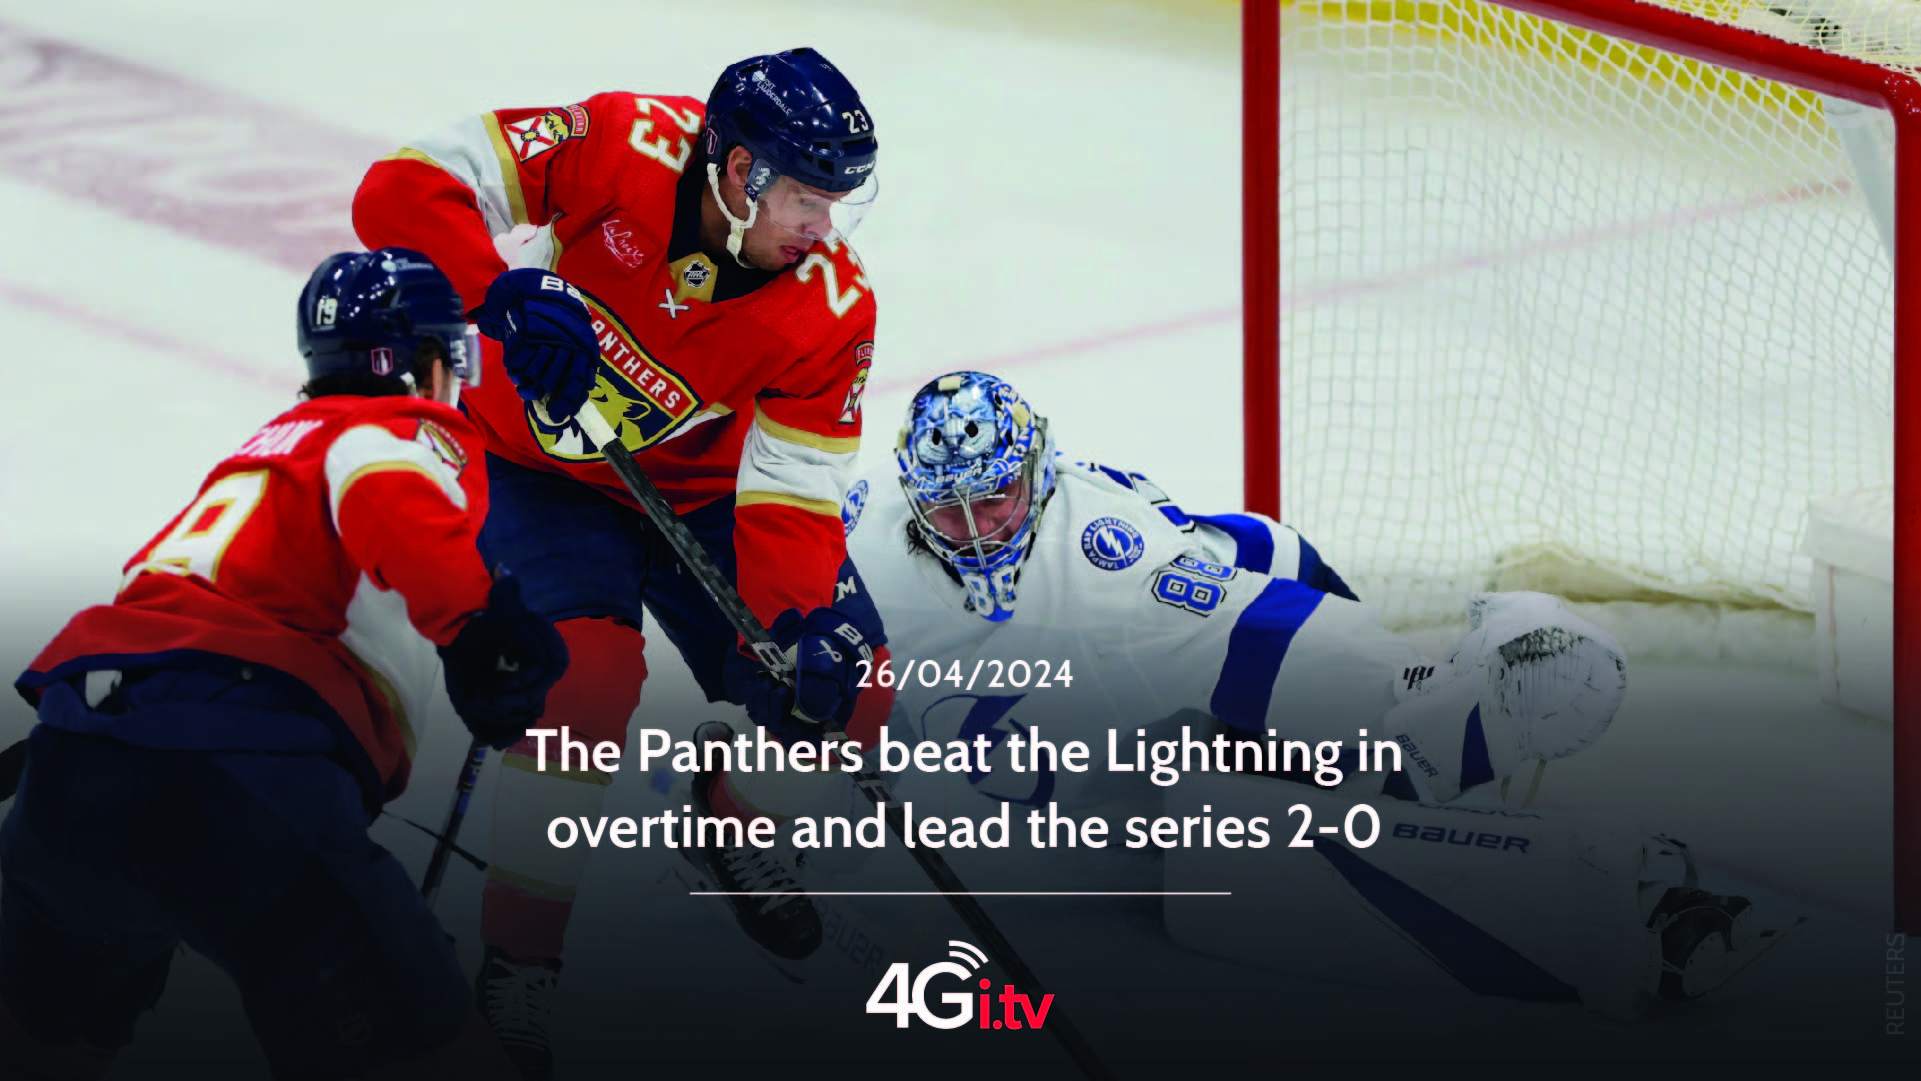 Lee más sobre el artículo The Panthers beat the Lightning in overtime and lead the series 2-0 